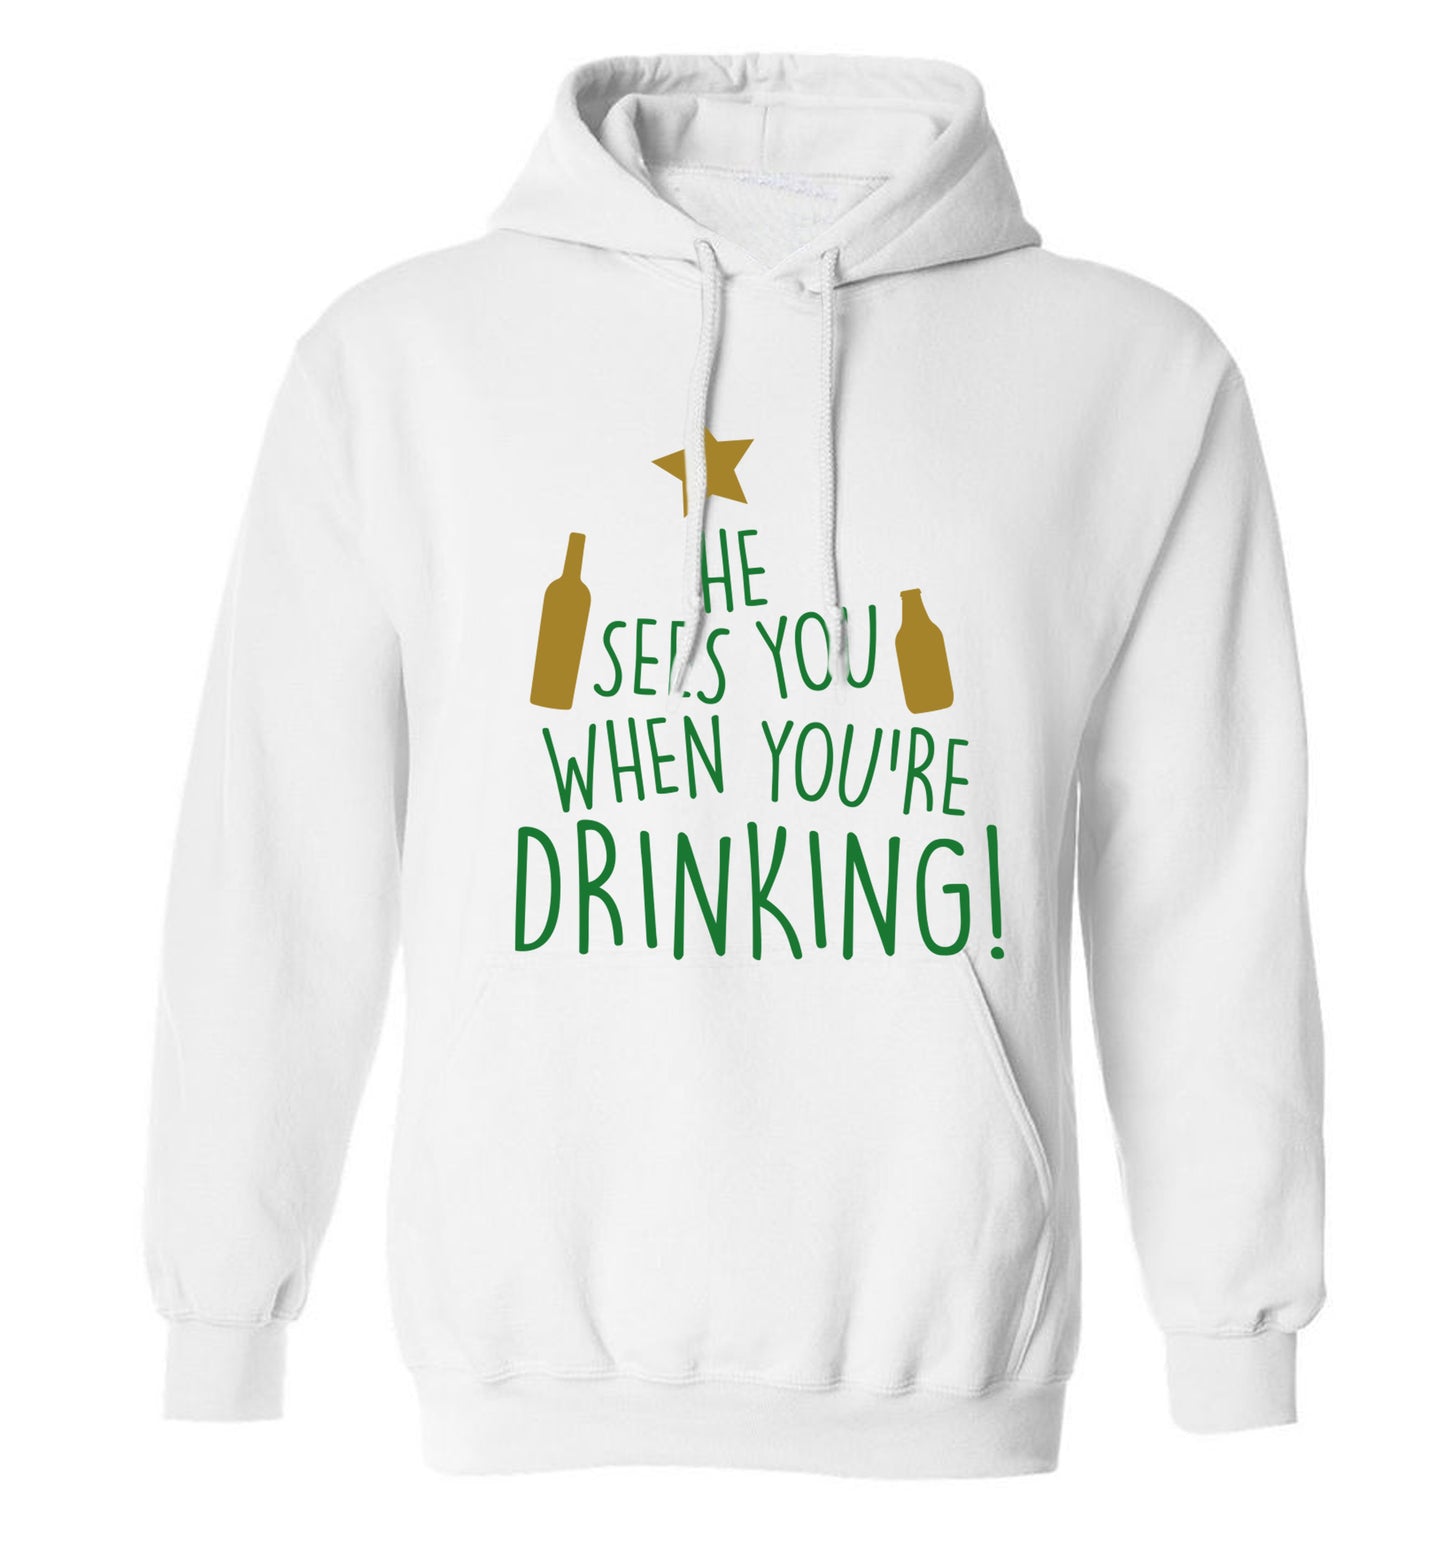 He sees you when you're drinking adults unisex white hoodie 2XL